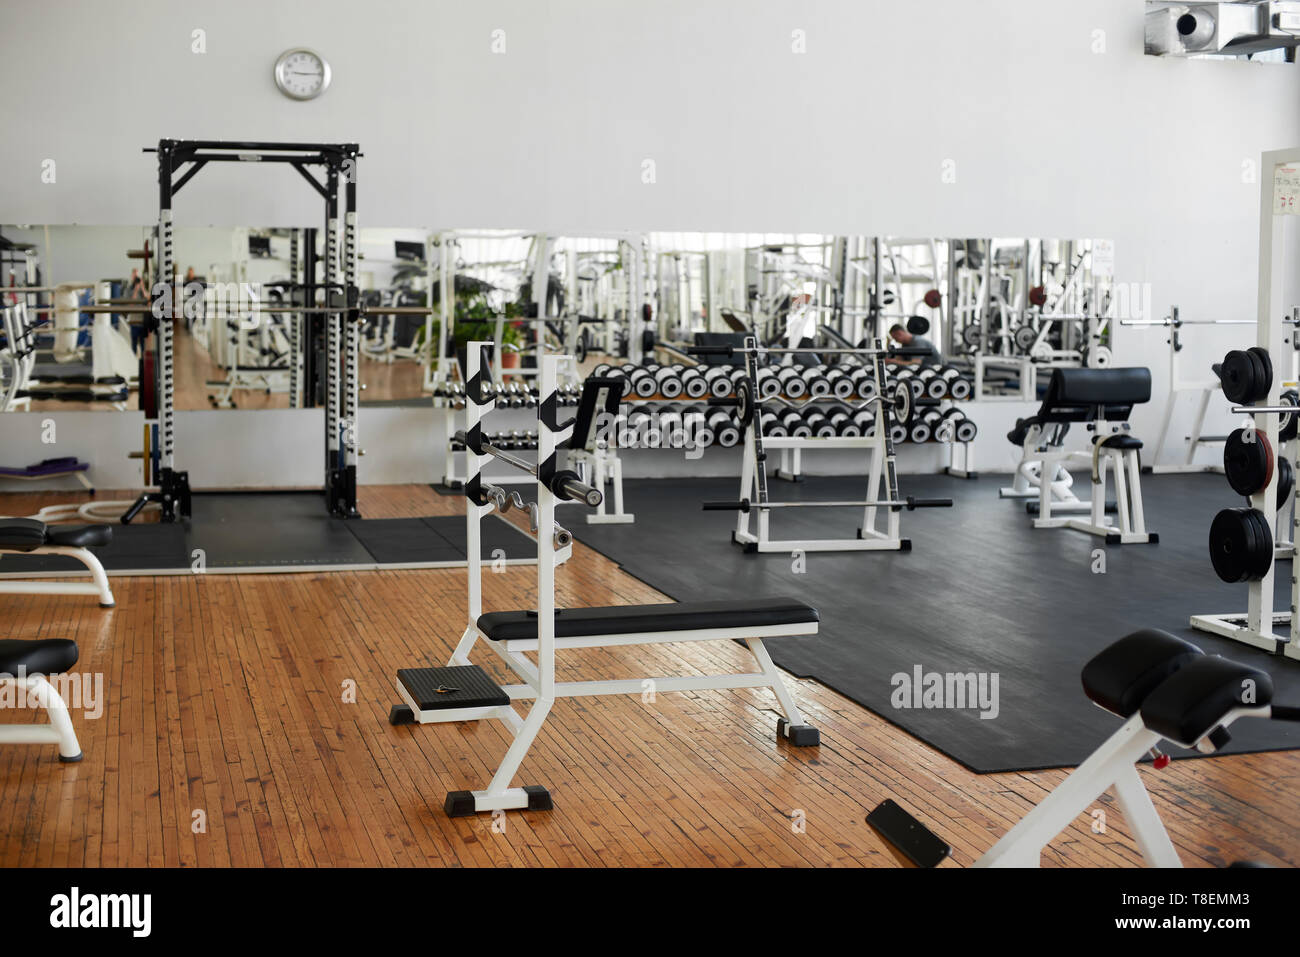 Gym interior with equipment. Modern fitness center with training ...